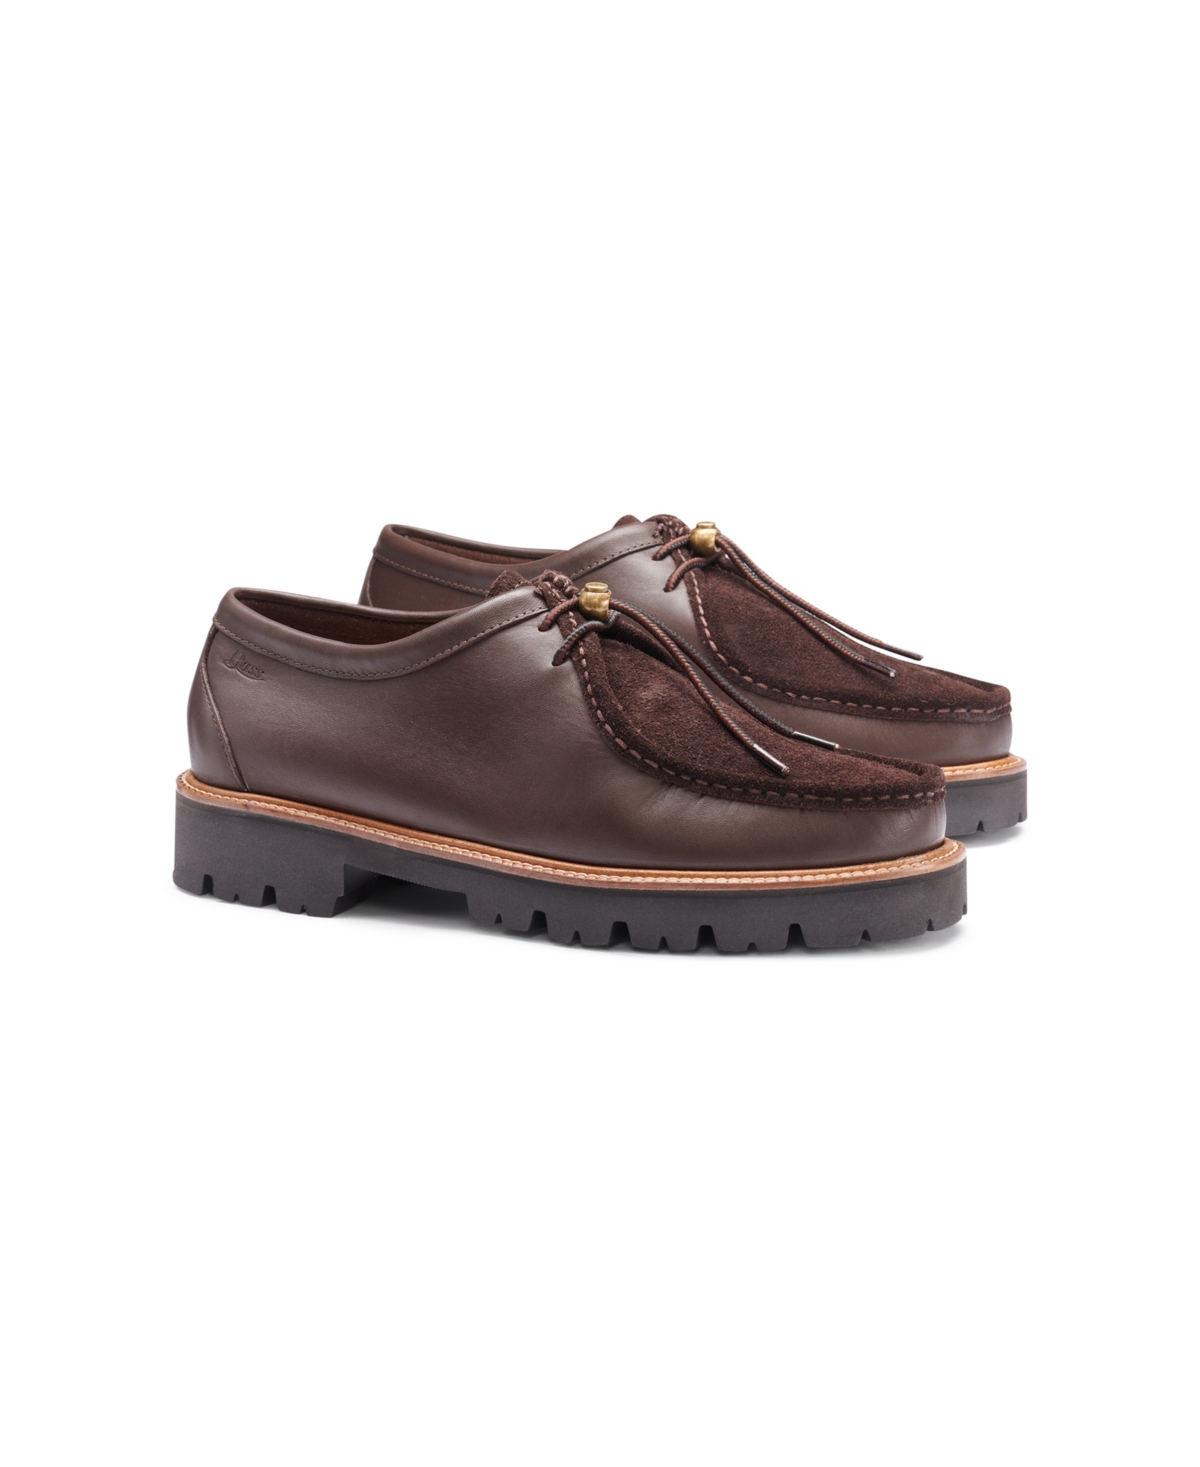 G.h.bass Men's Wallace Moc Hand Sewn Loafers - Brown